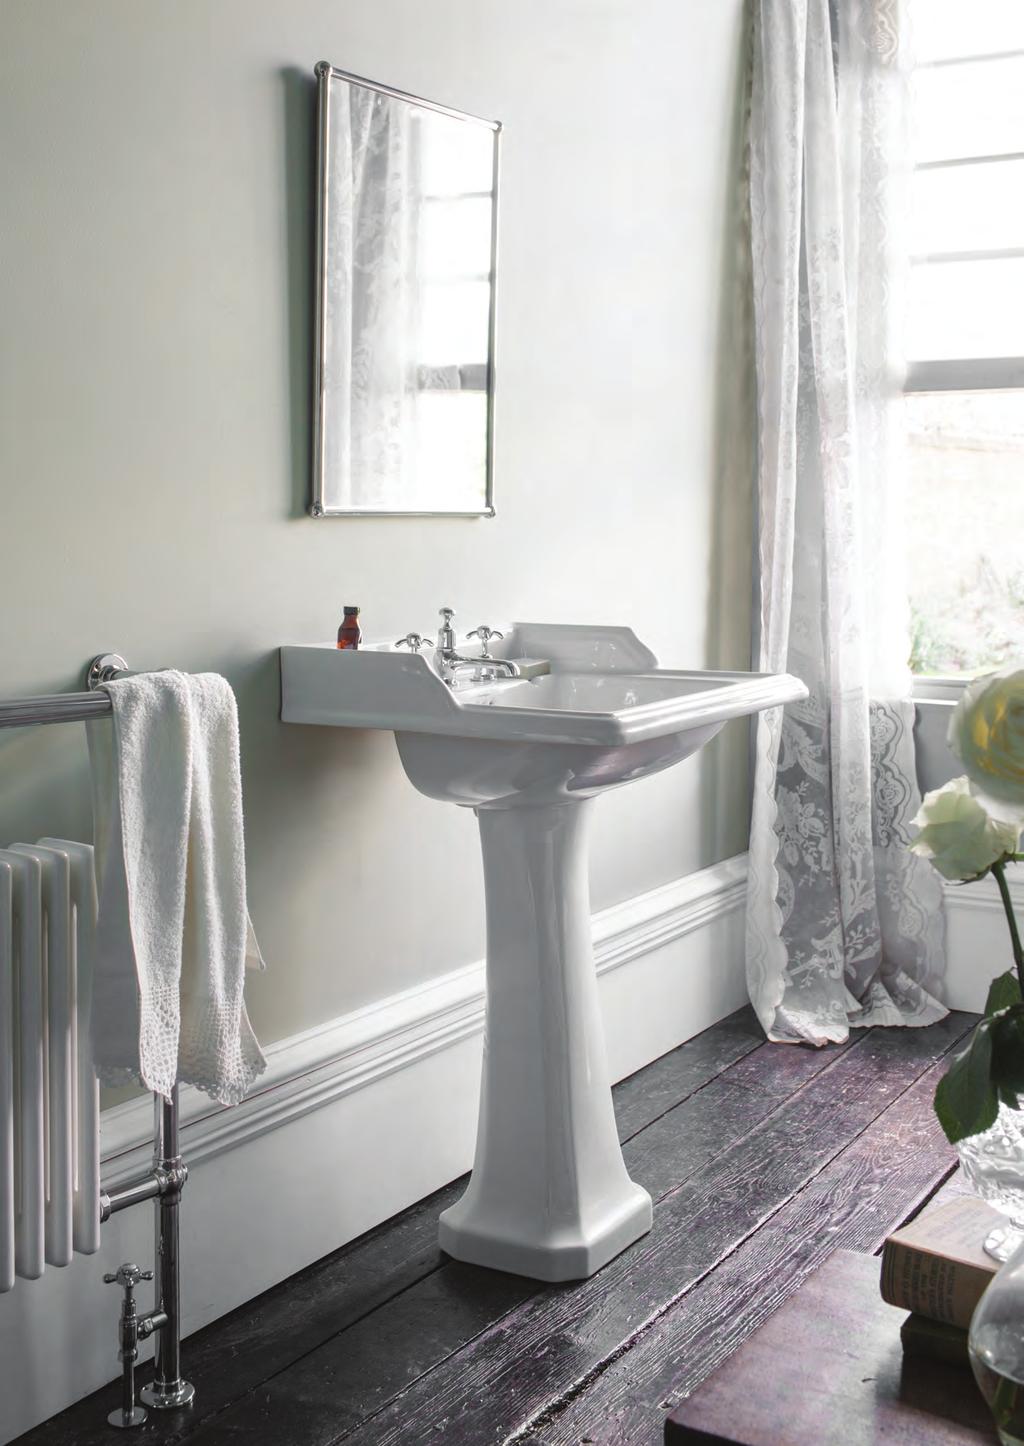 CLASSIC RECTANGULAR BASINS A grand basin design, the Classic works beautifully in every surrounding to create a vintage inspired bathroom, effortlessly.